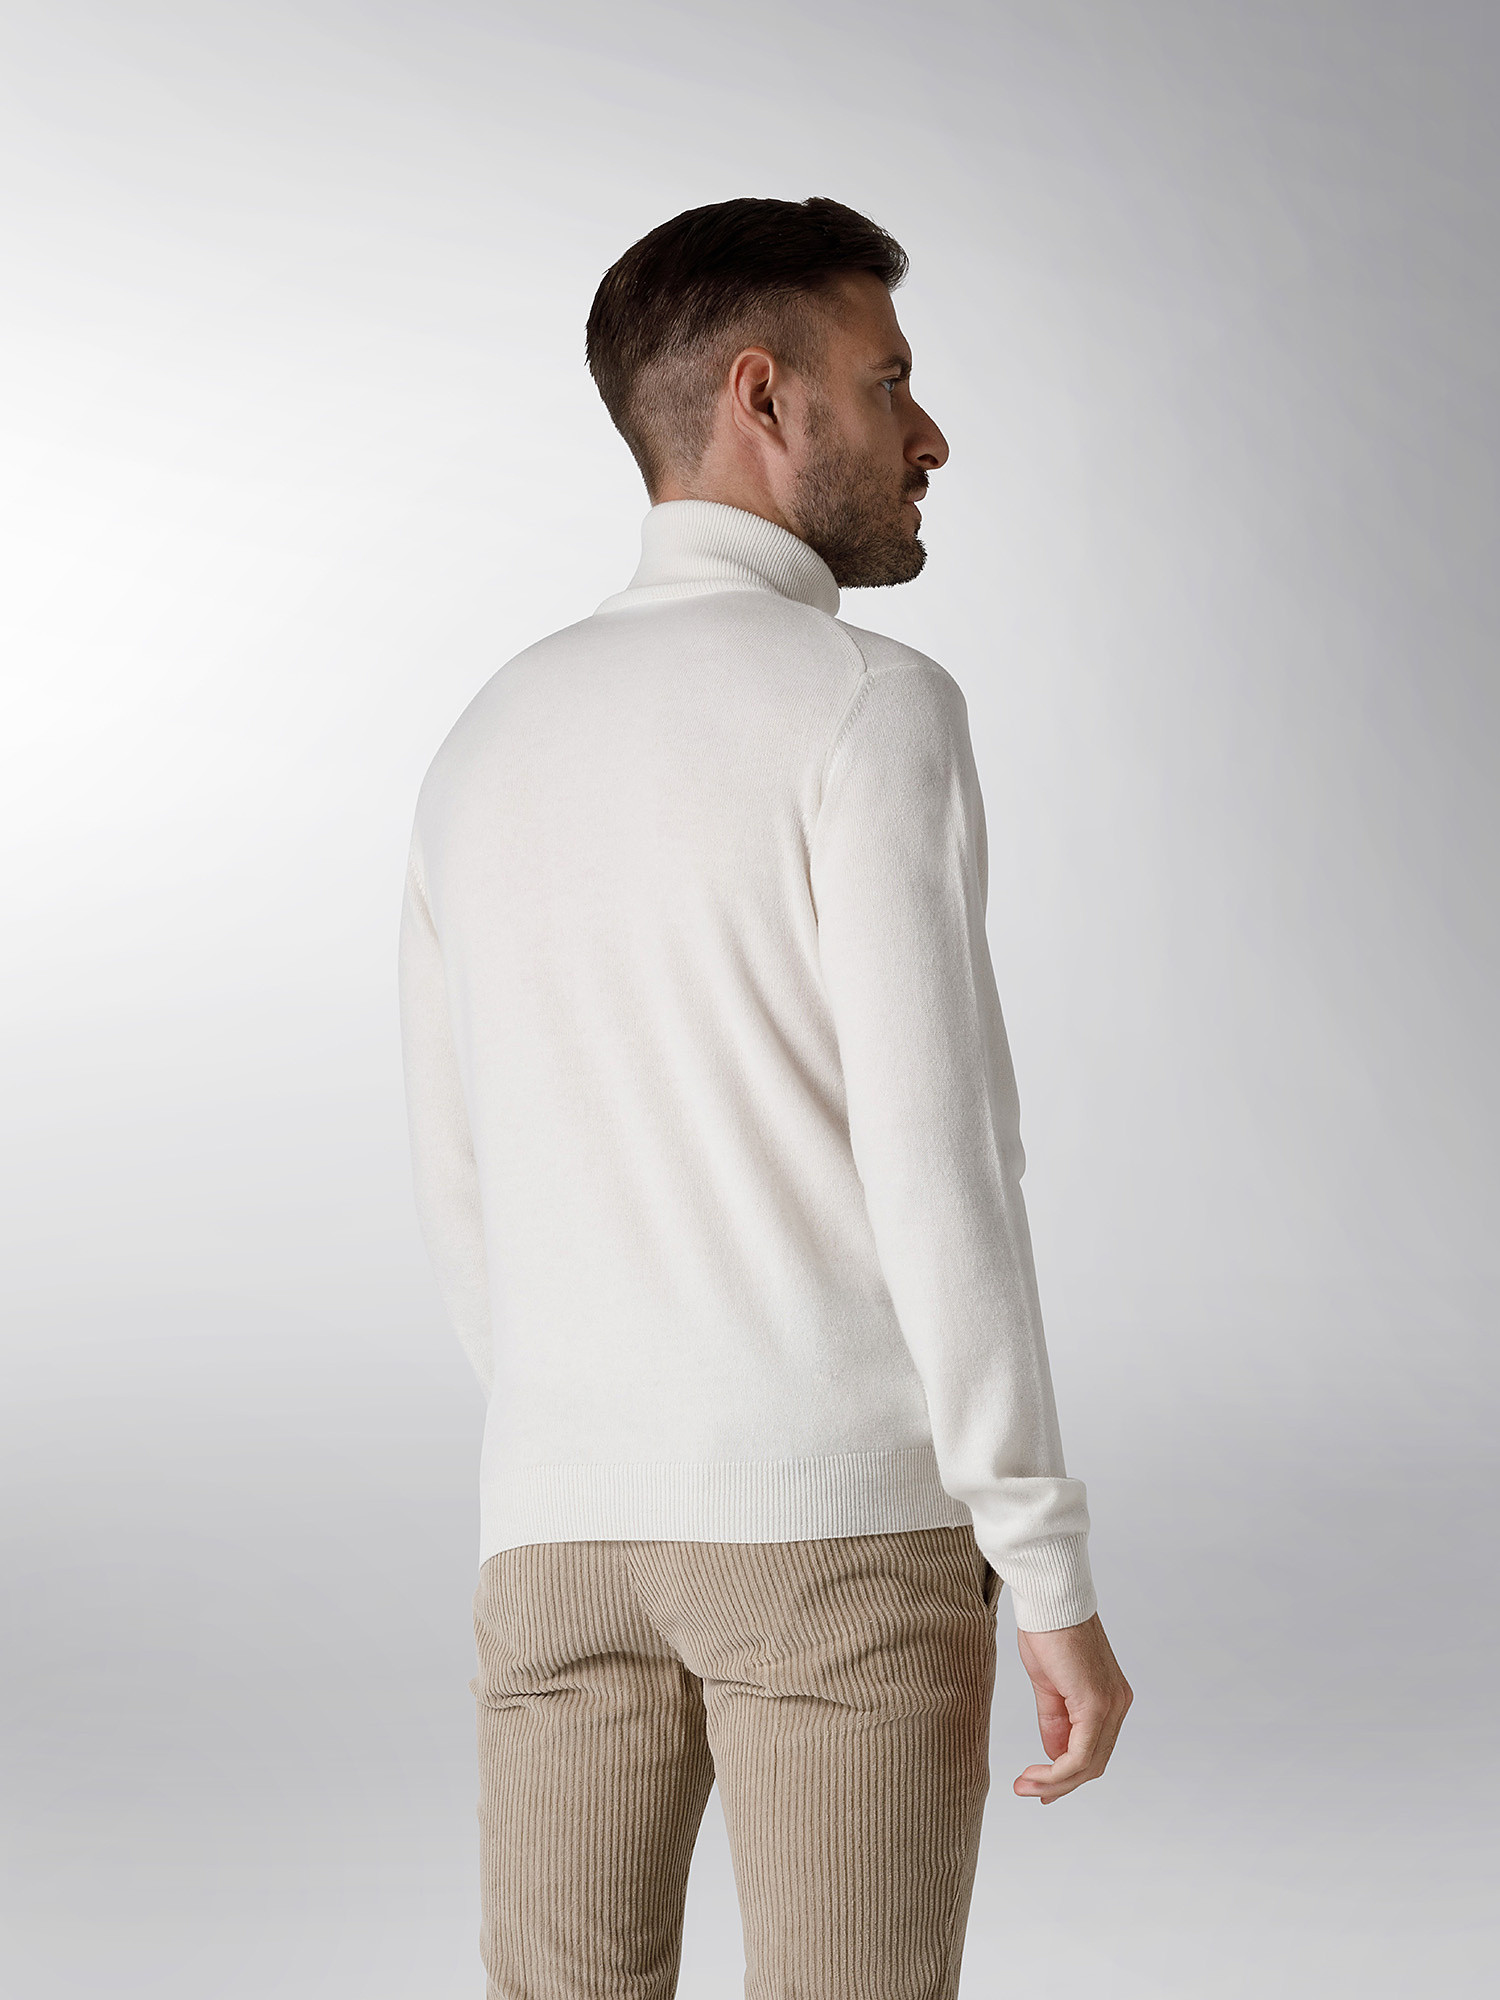 Coin Cashmere - Turtleneck in pure cashmere, White, large image number 2